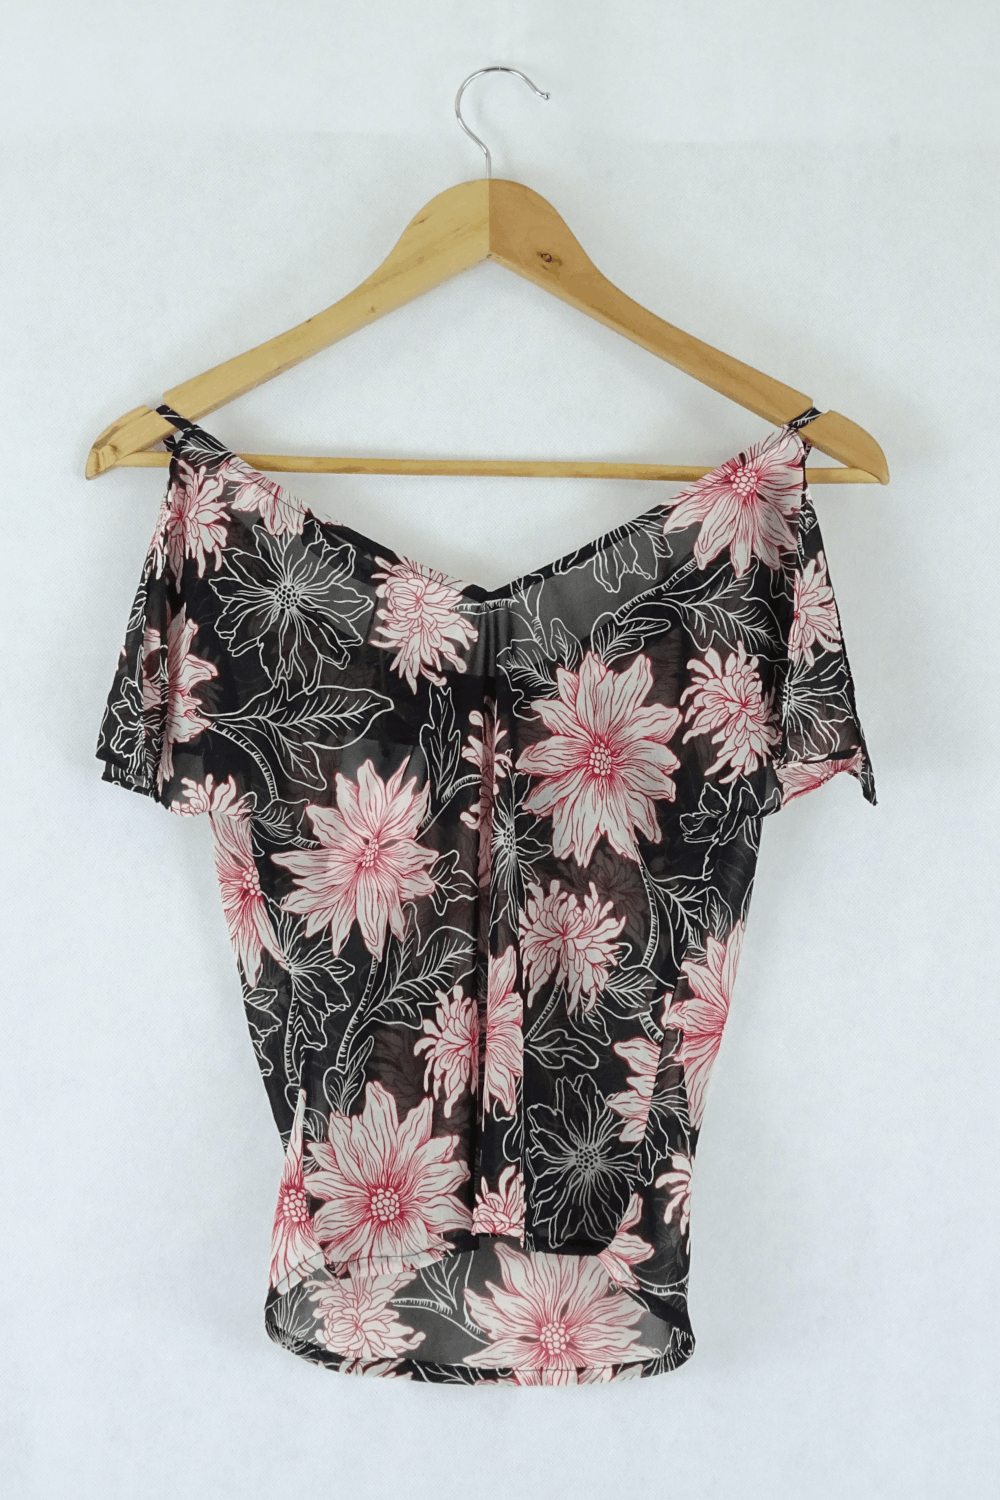 Sportsgirl Sheer Black and Pink Floral Blouse S